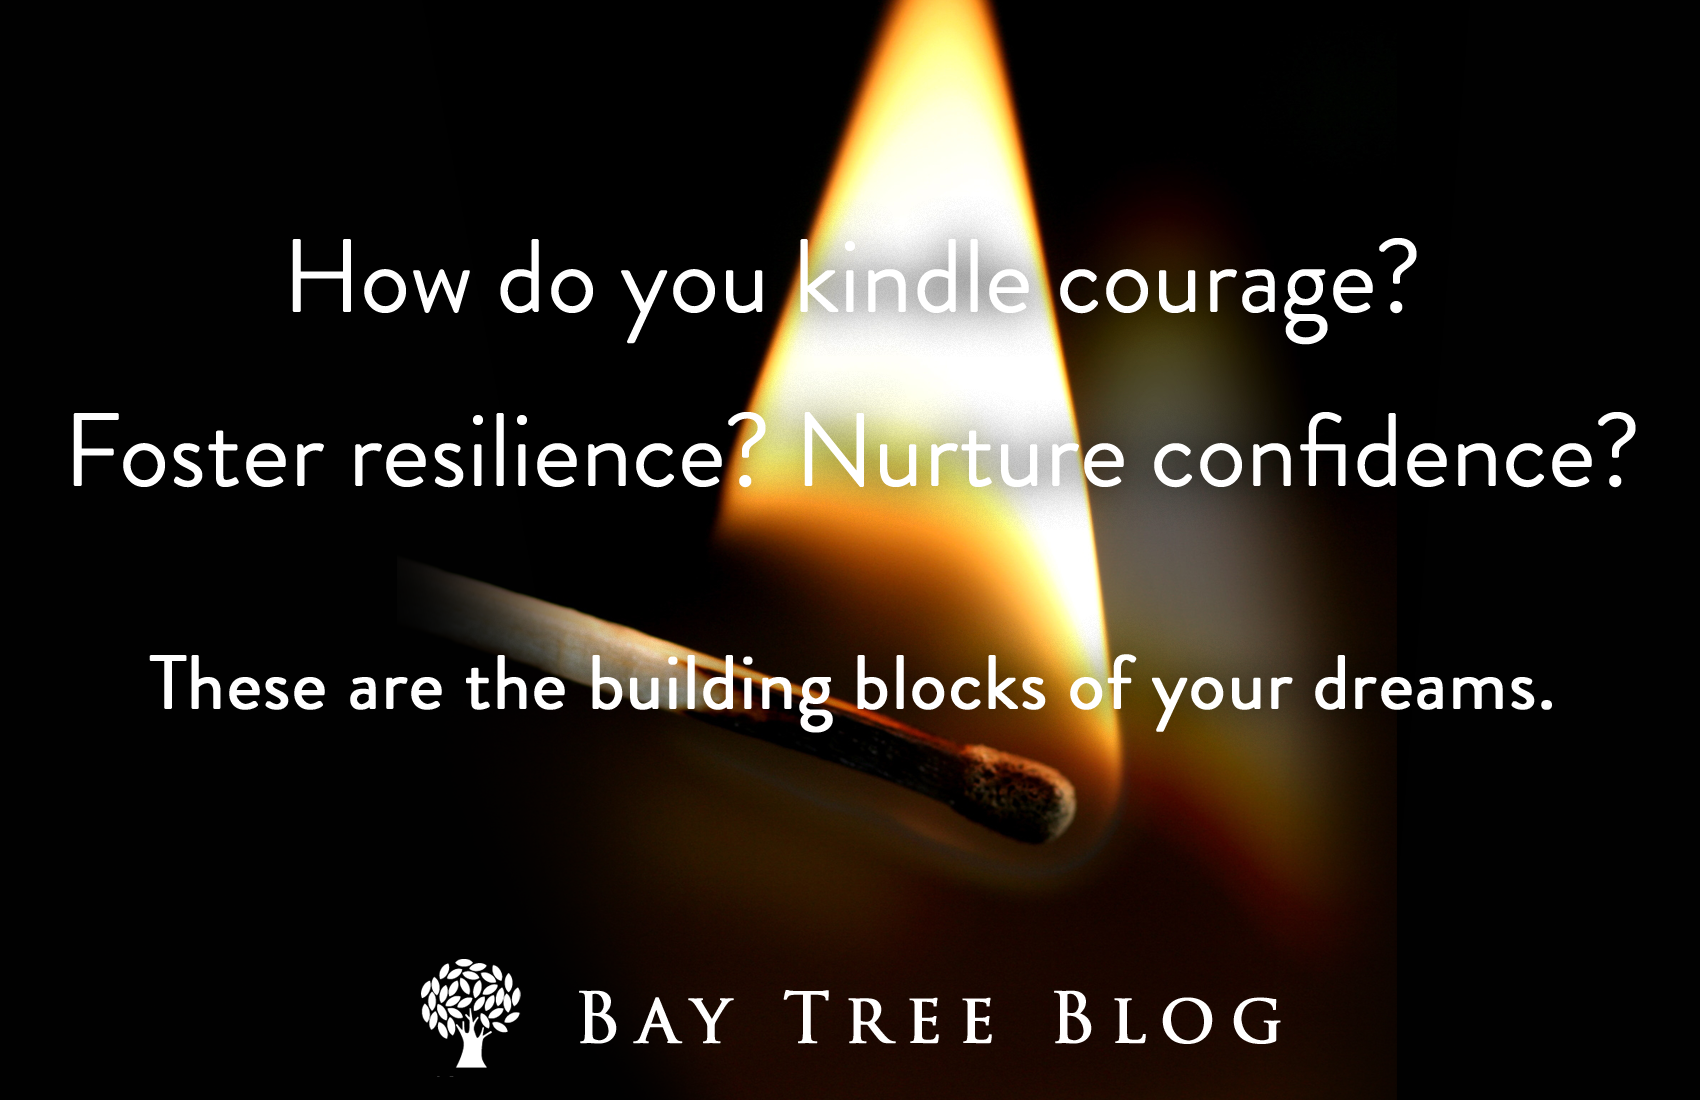 How do you kindle courage? Foster resilience? Nurture confidence? These are the building blocks of your dreams. BayTreeBlog.com